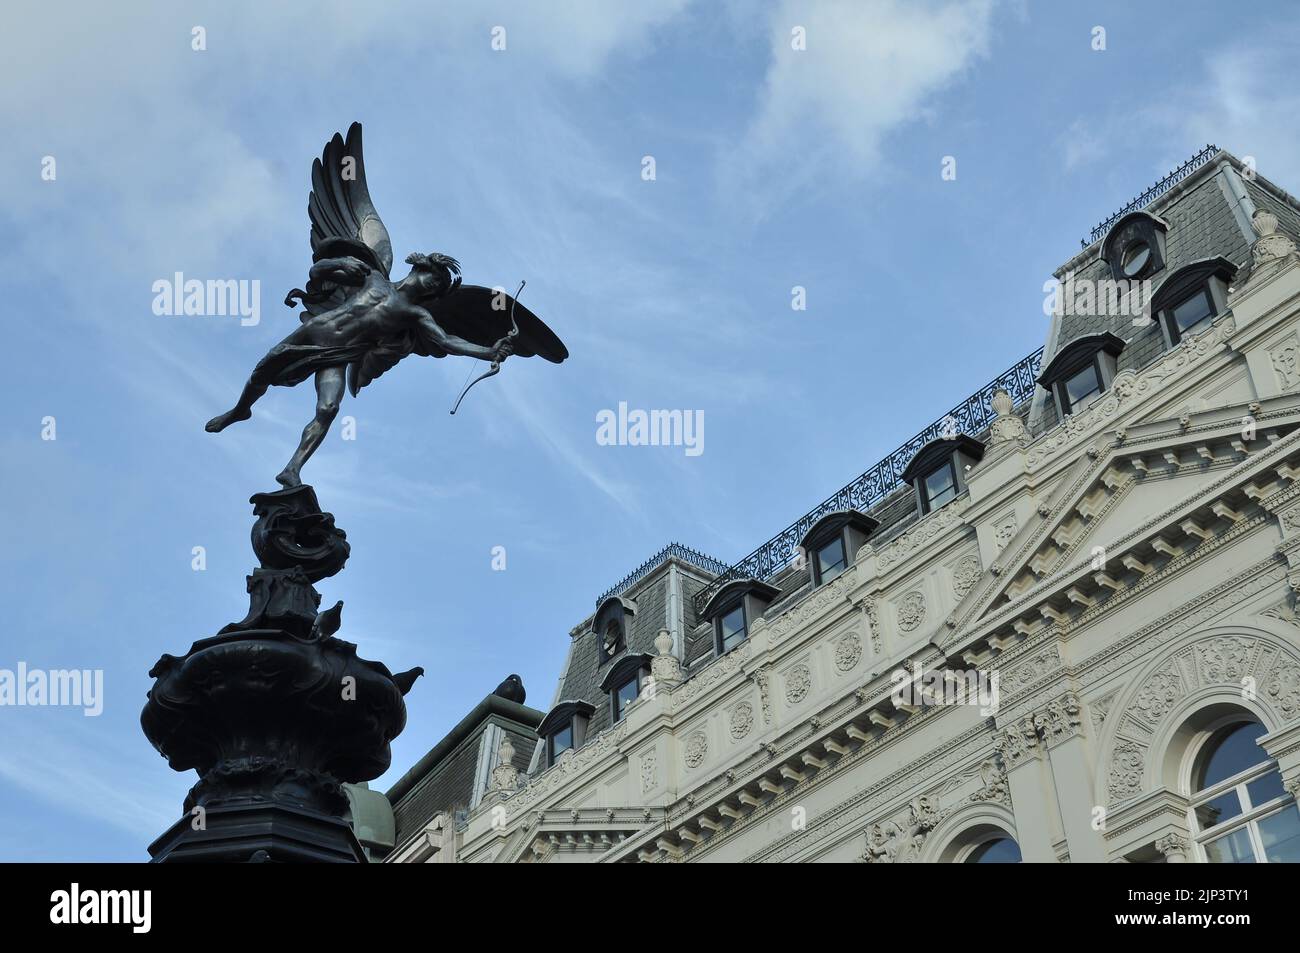 The Shaftesbury Memorial Fountain with a winged statue of Anteros, at Piccadilly Circus in London, England Stock Photo